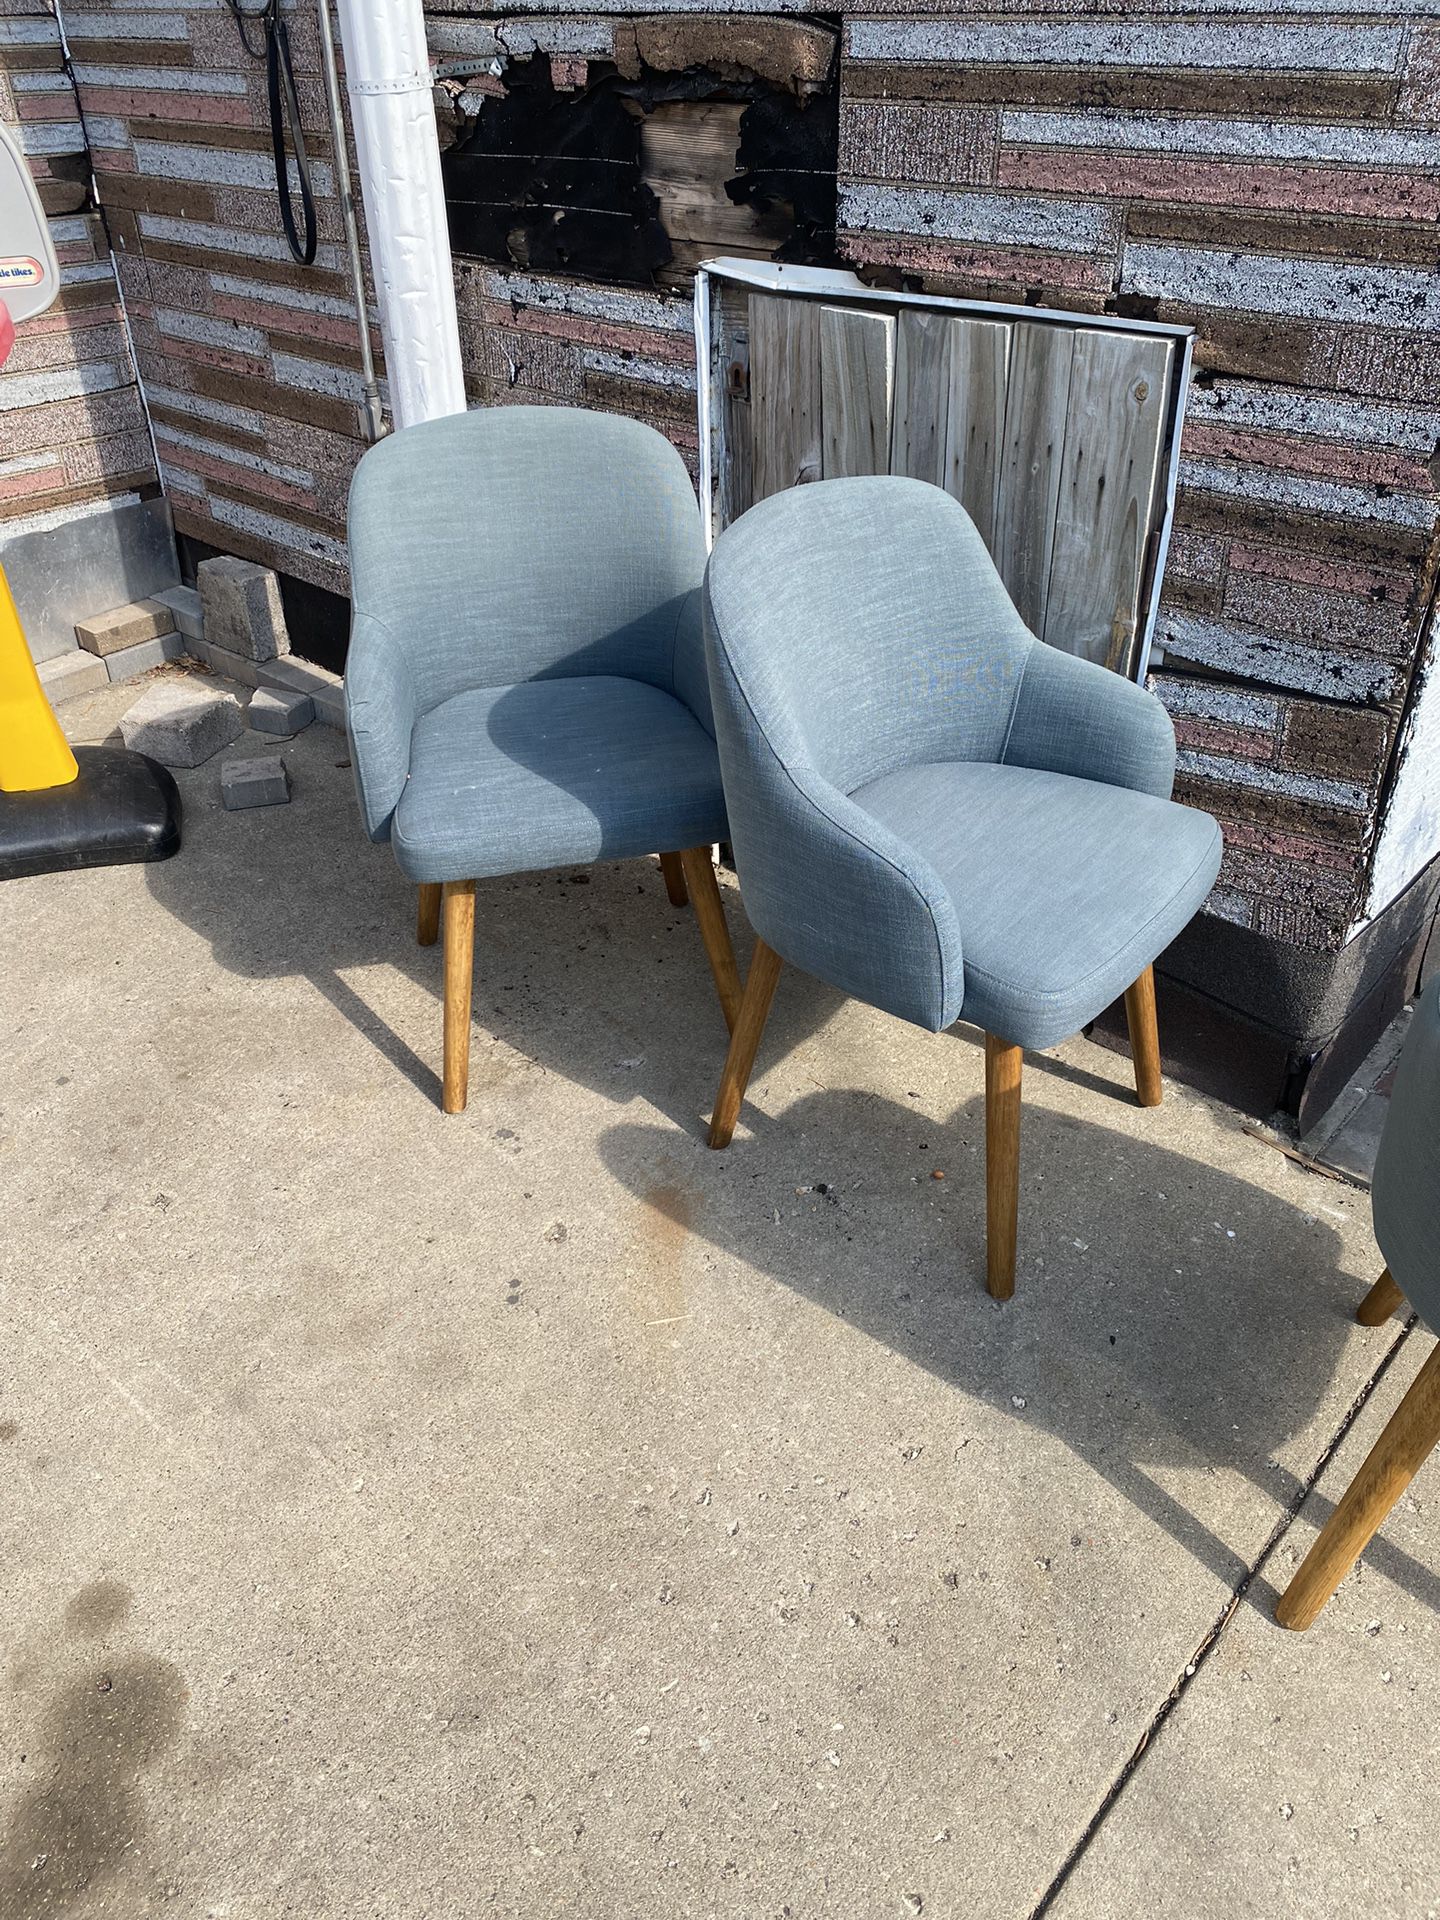 West Elm Chairs 